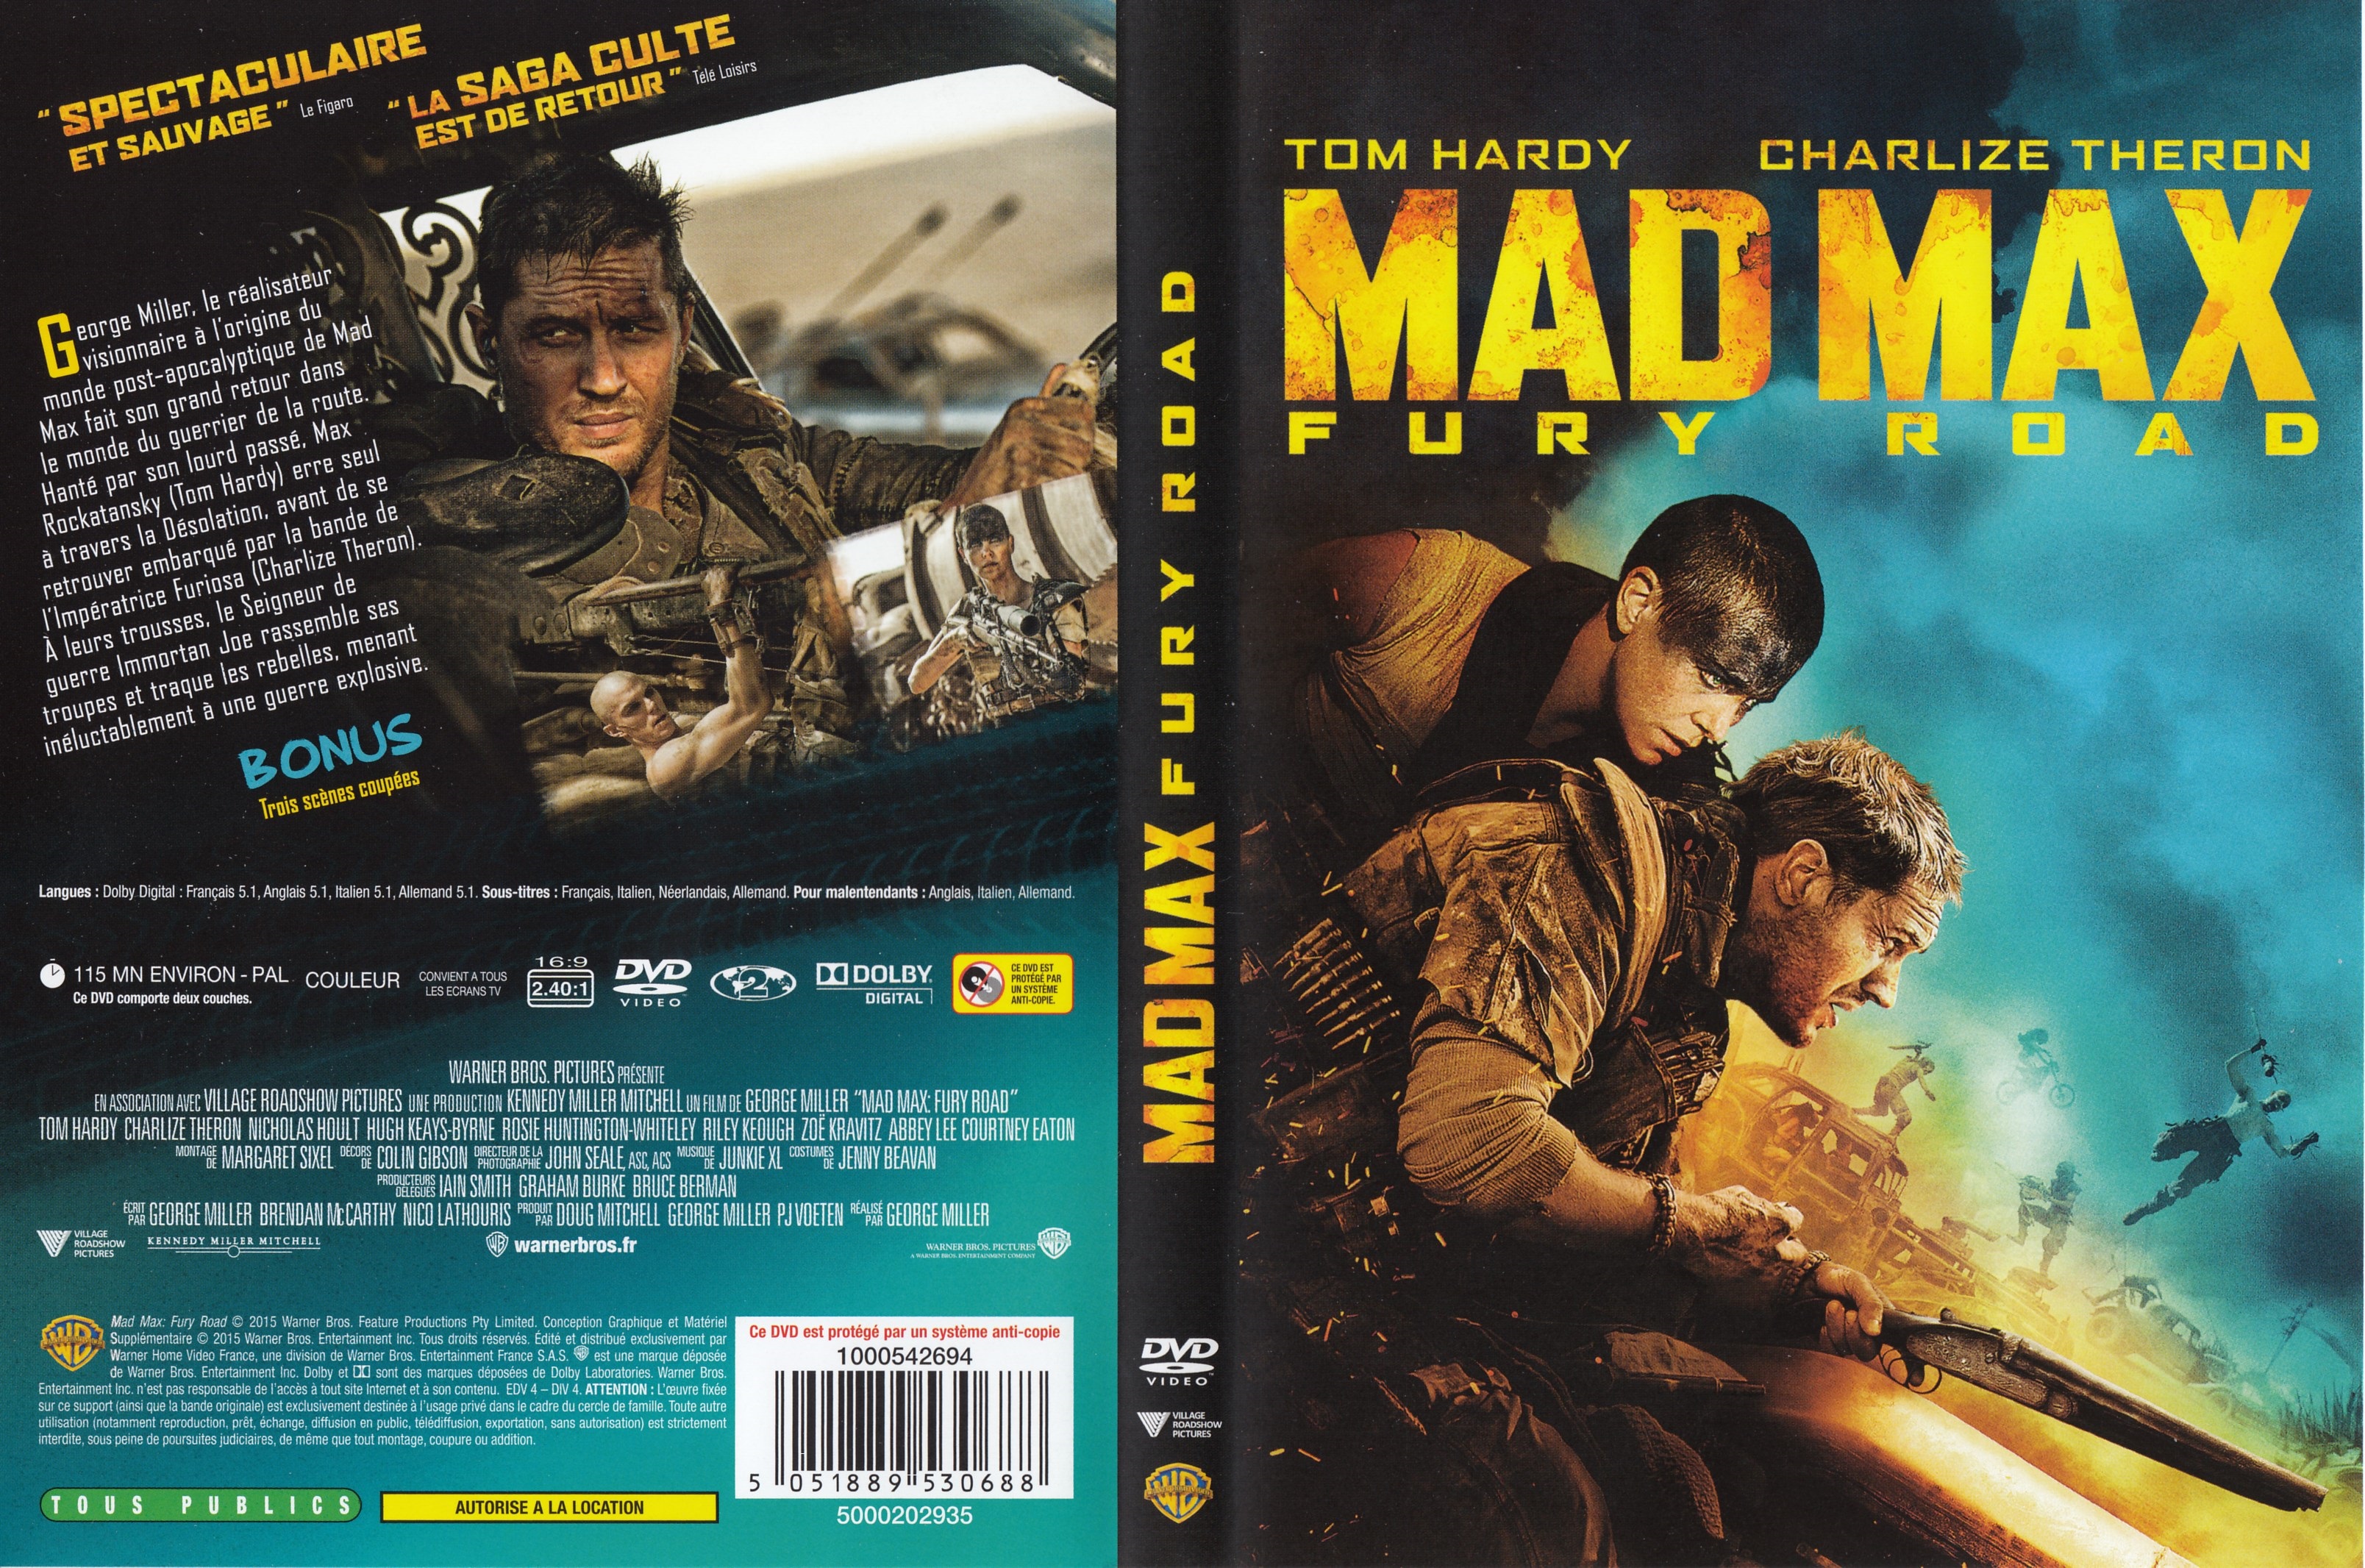 Jaquette DVD Mad Max: Fury Road